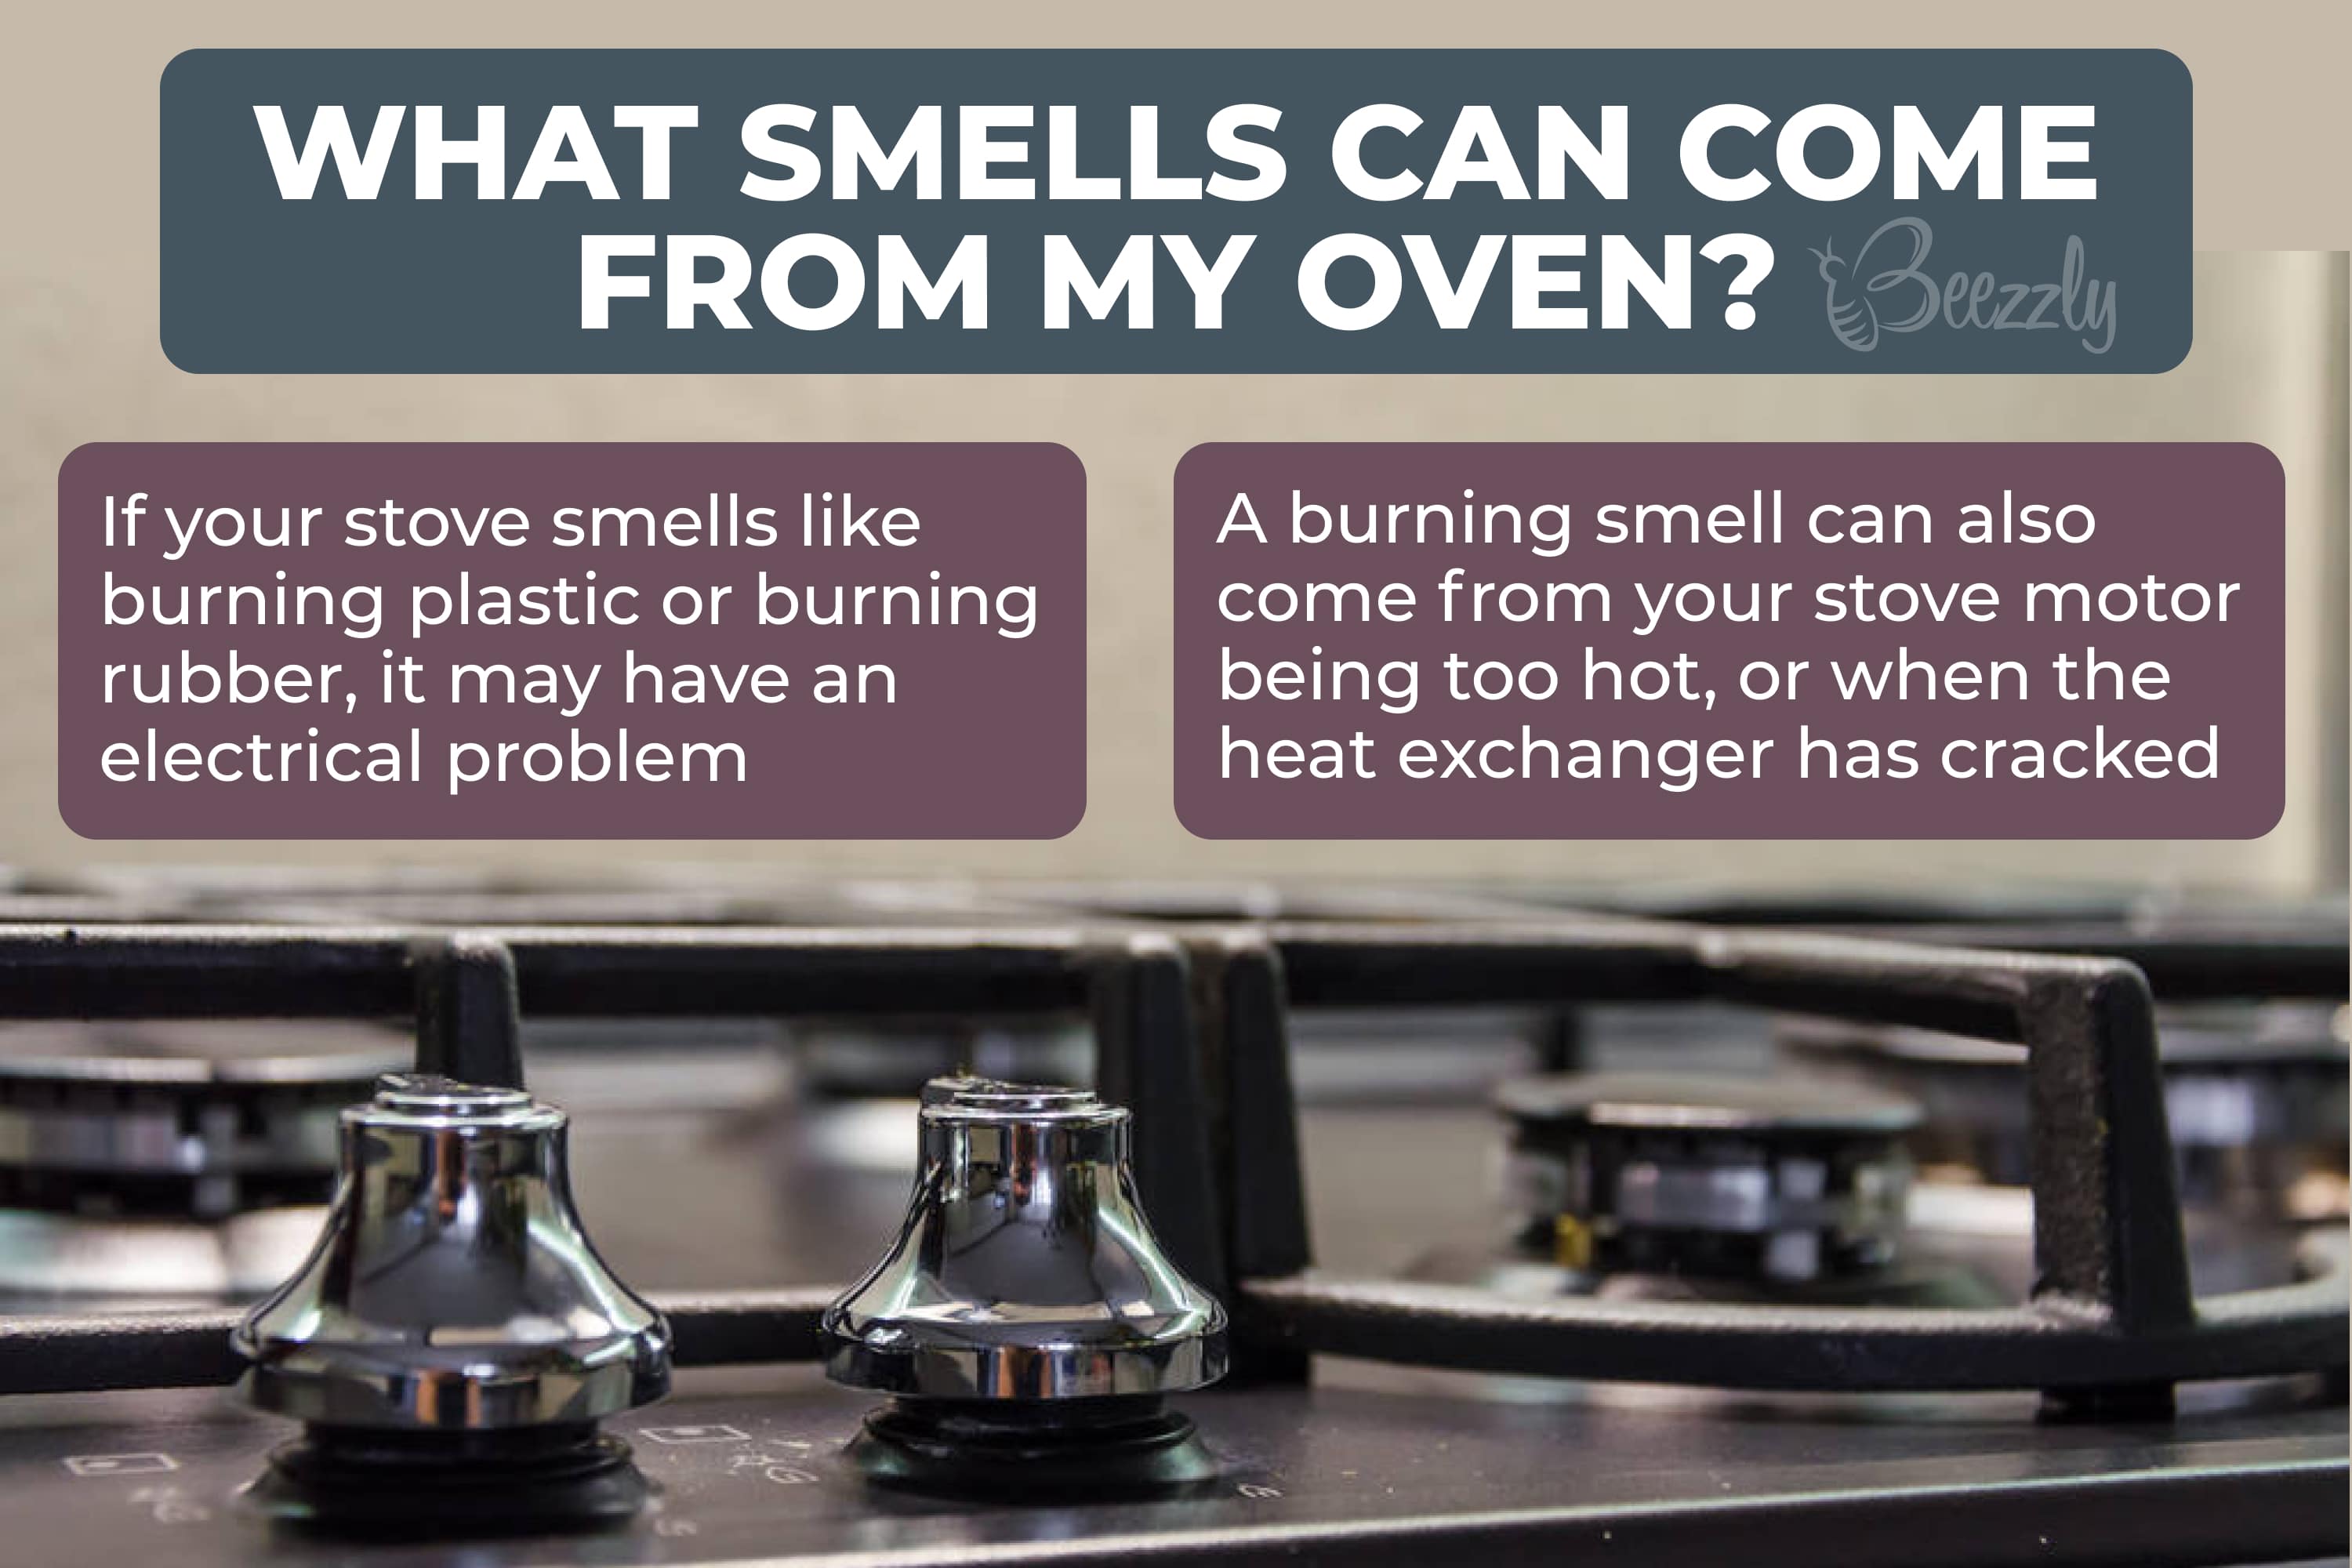 What smells can come from my oven